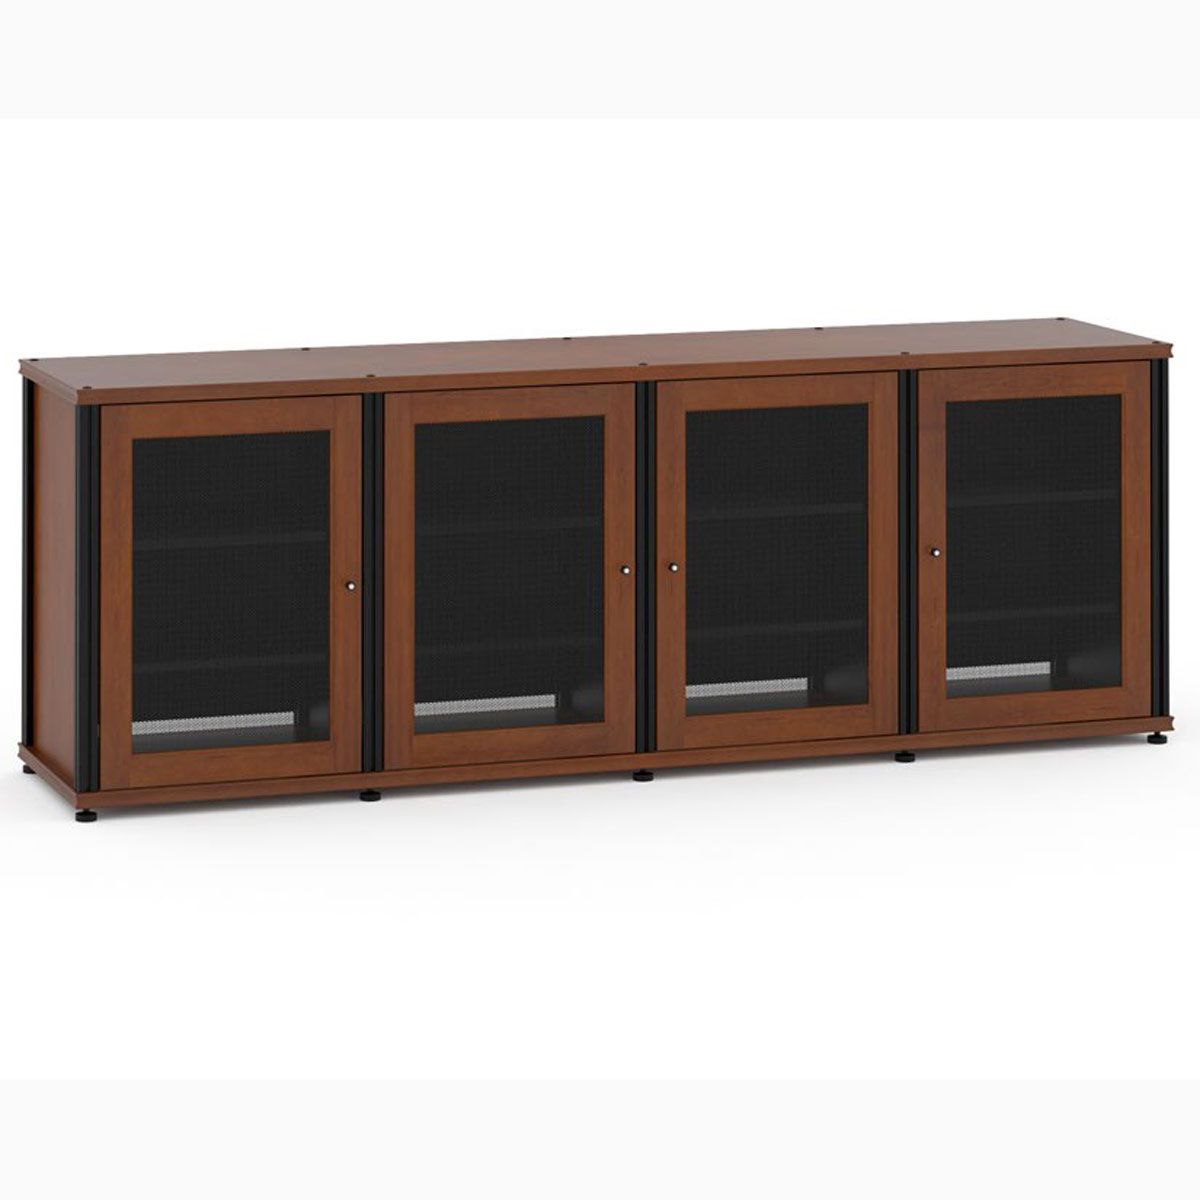 Salamander Designs Synergy Model 347 A/V Cabinet, cherry with black posts